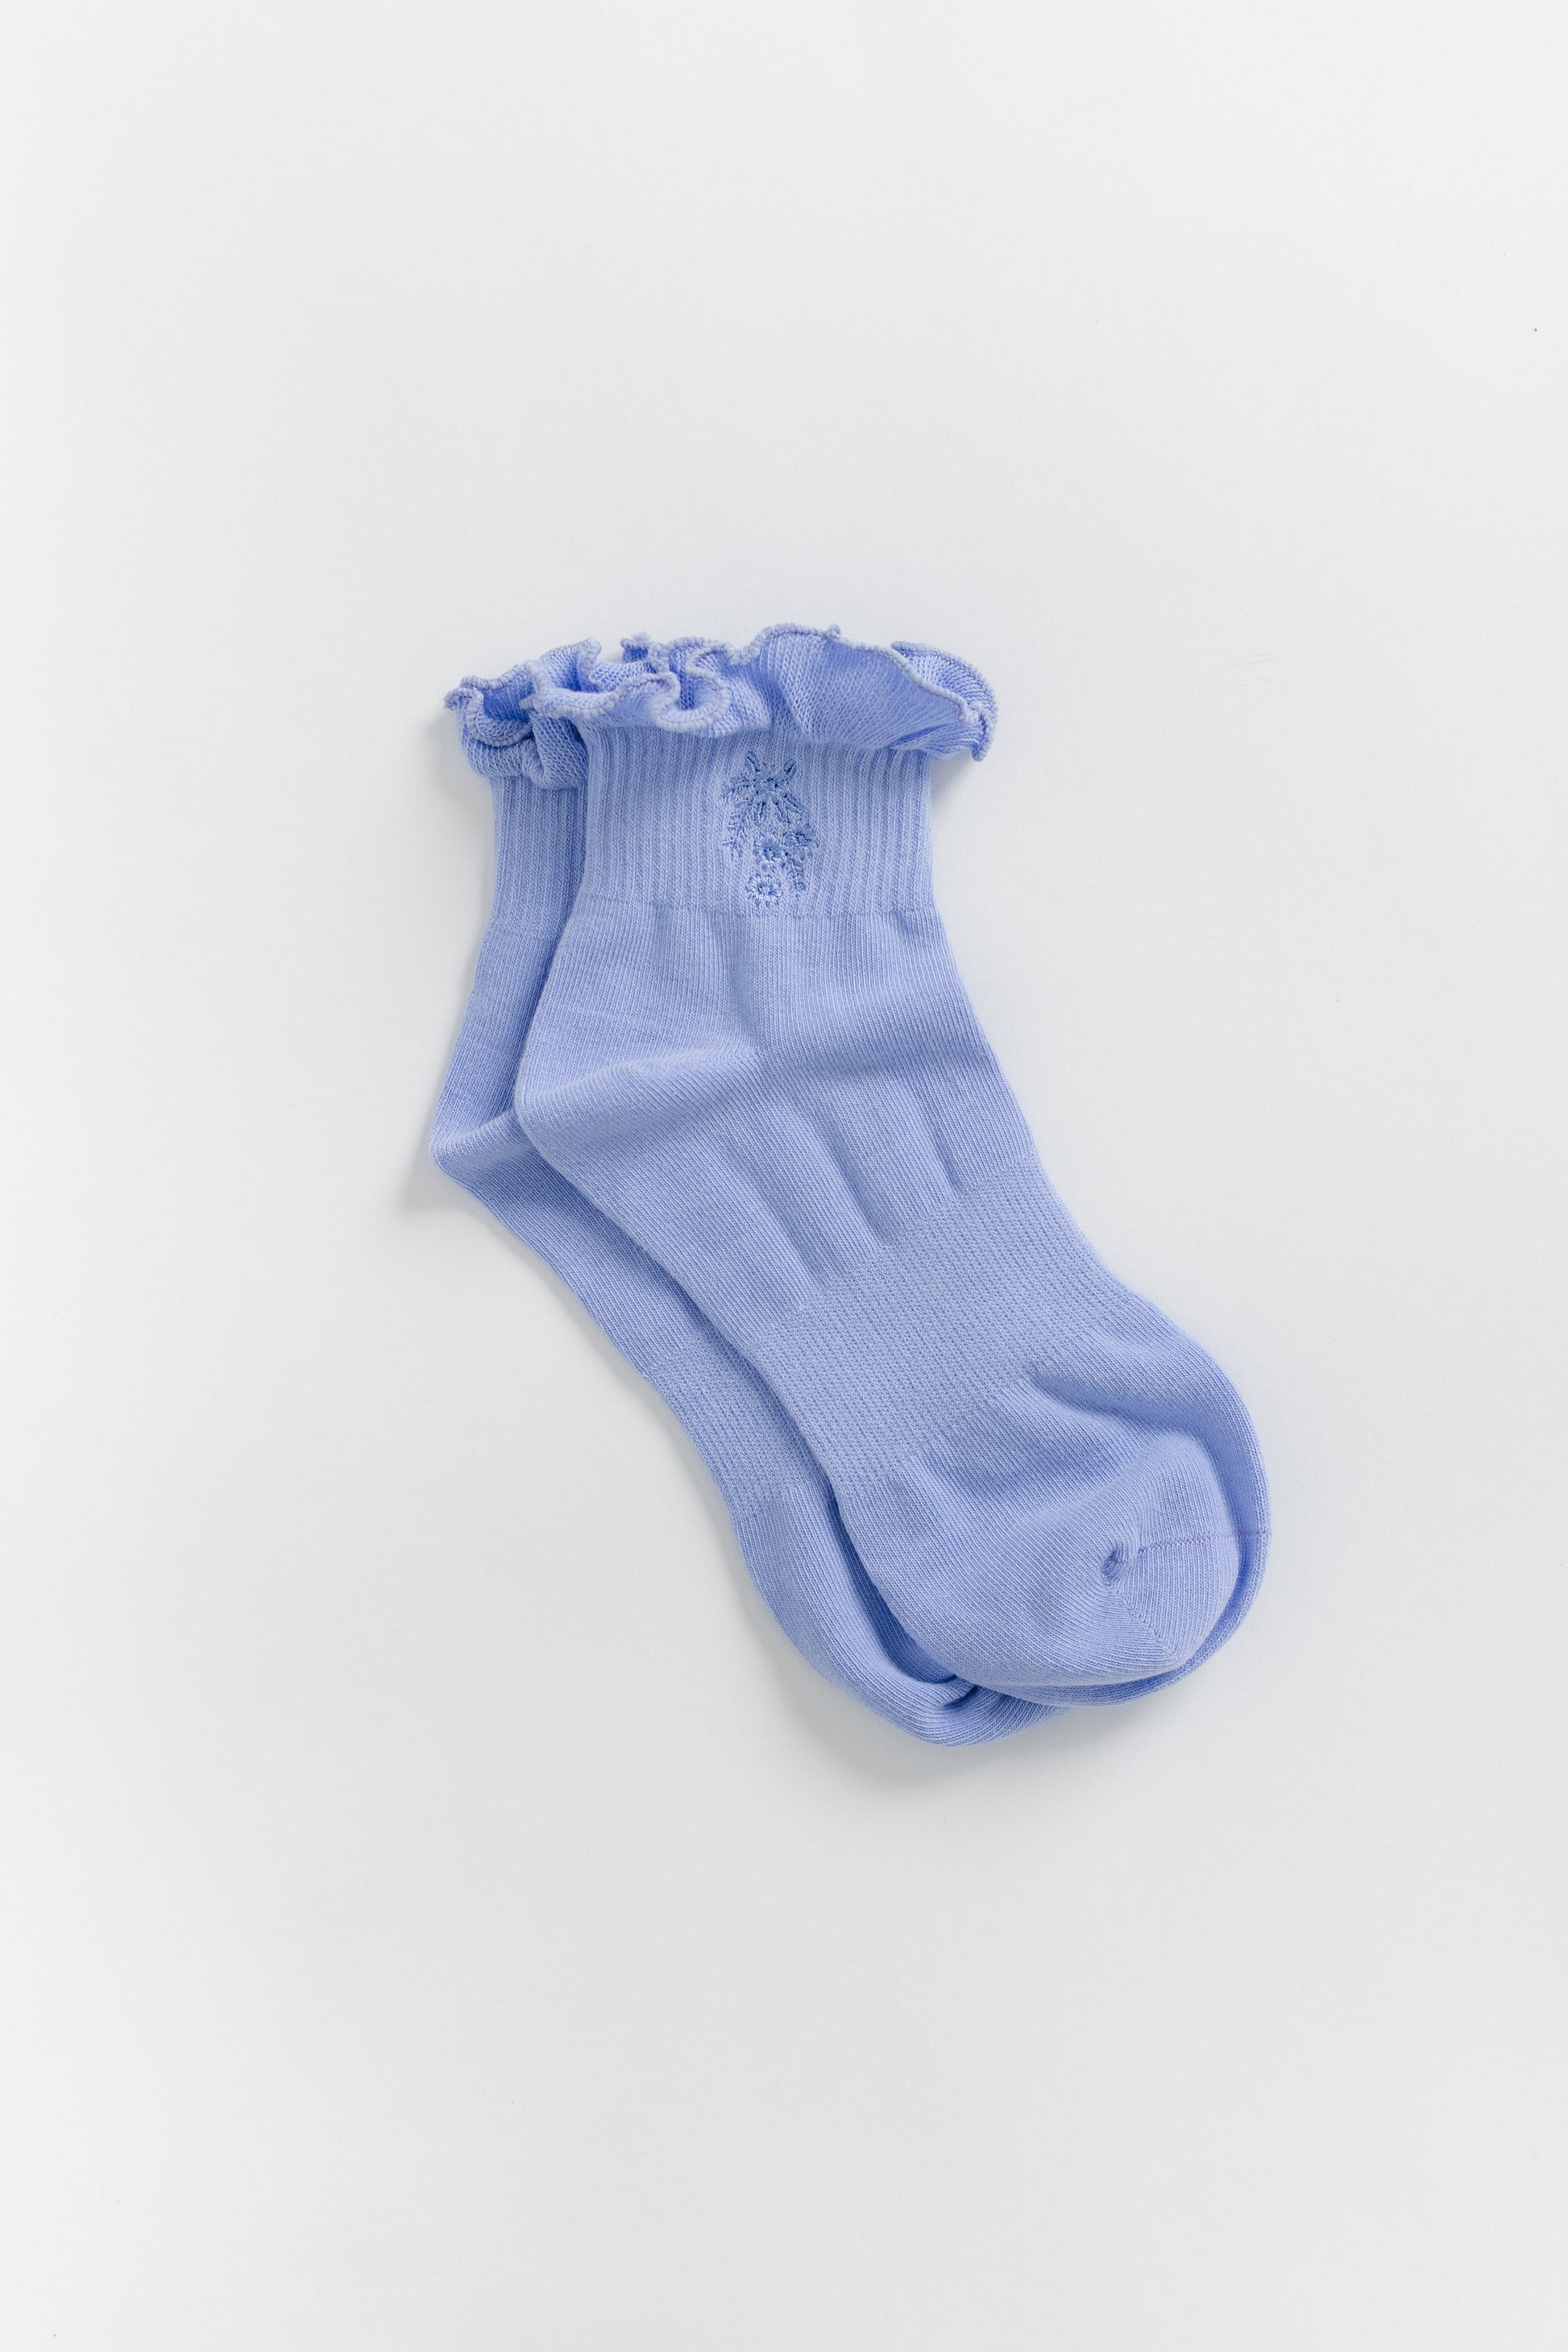 Cove Embroidered Ruffle Quarter WOMEN'S SOCKS Cove Accessories Periwinkle OS 